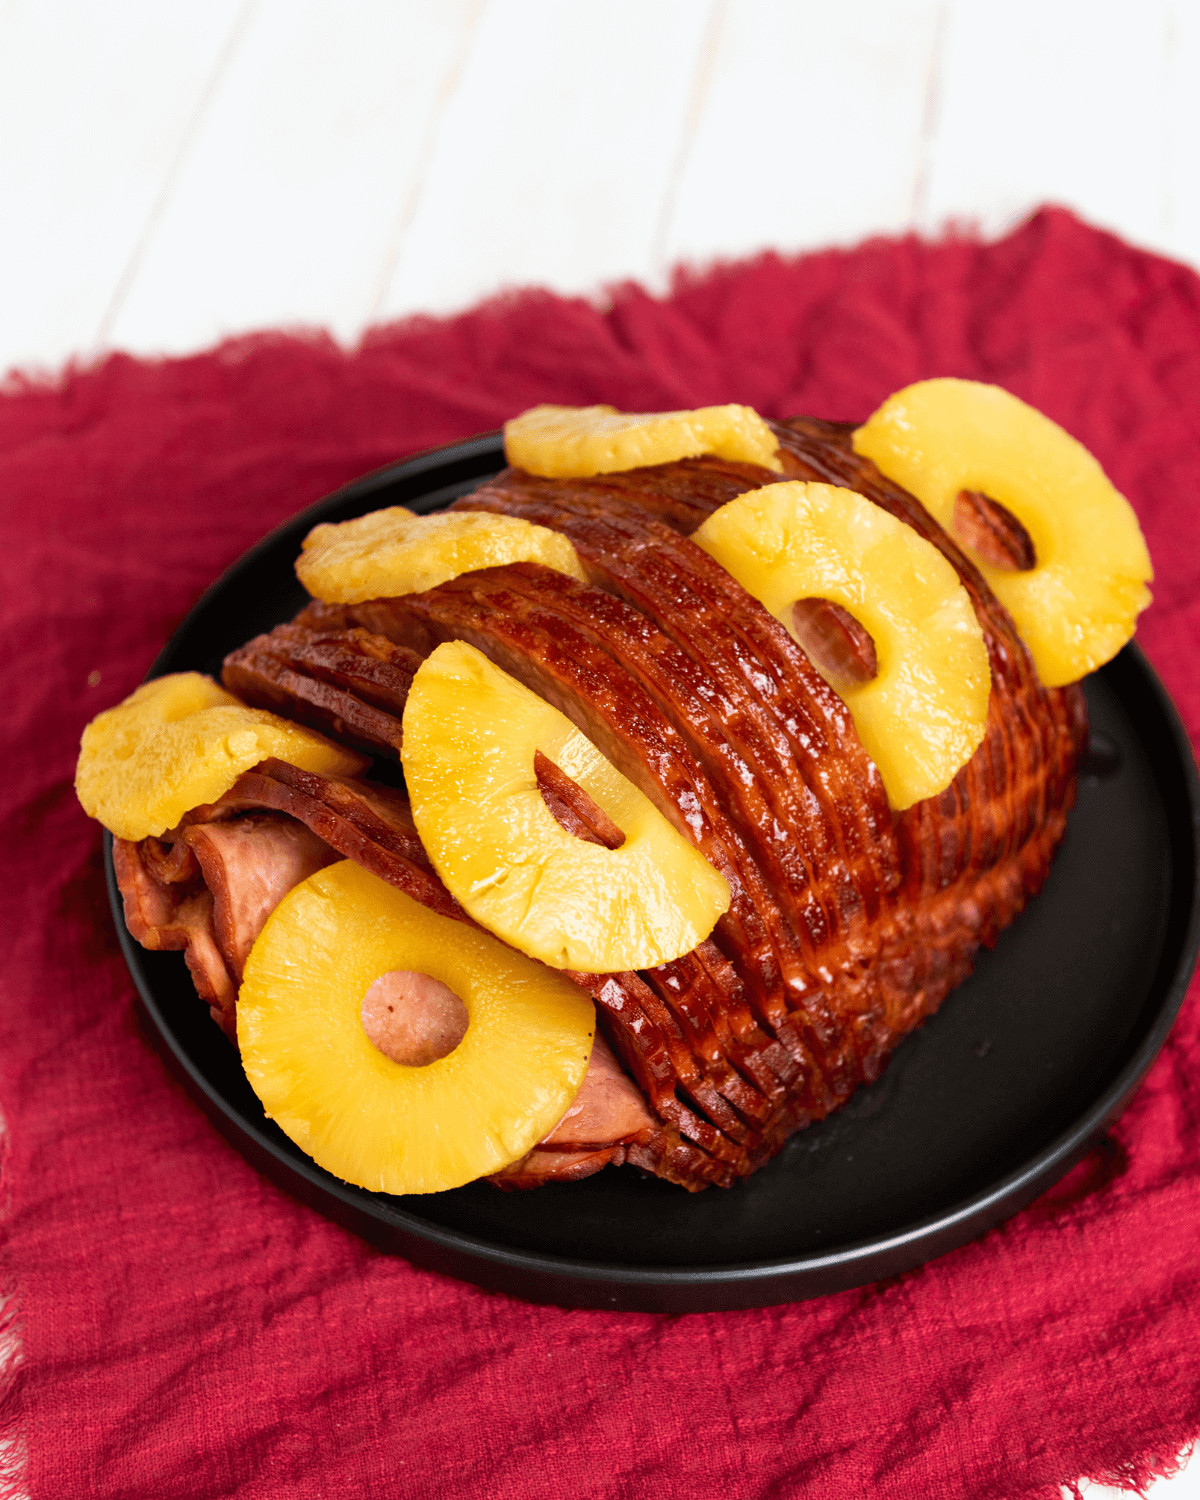 A whole ham decorated with pineapple and brown sugar.